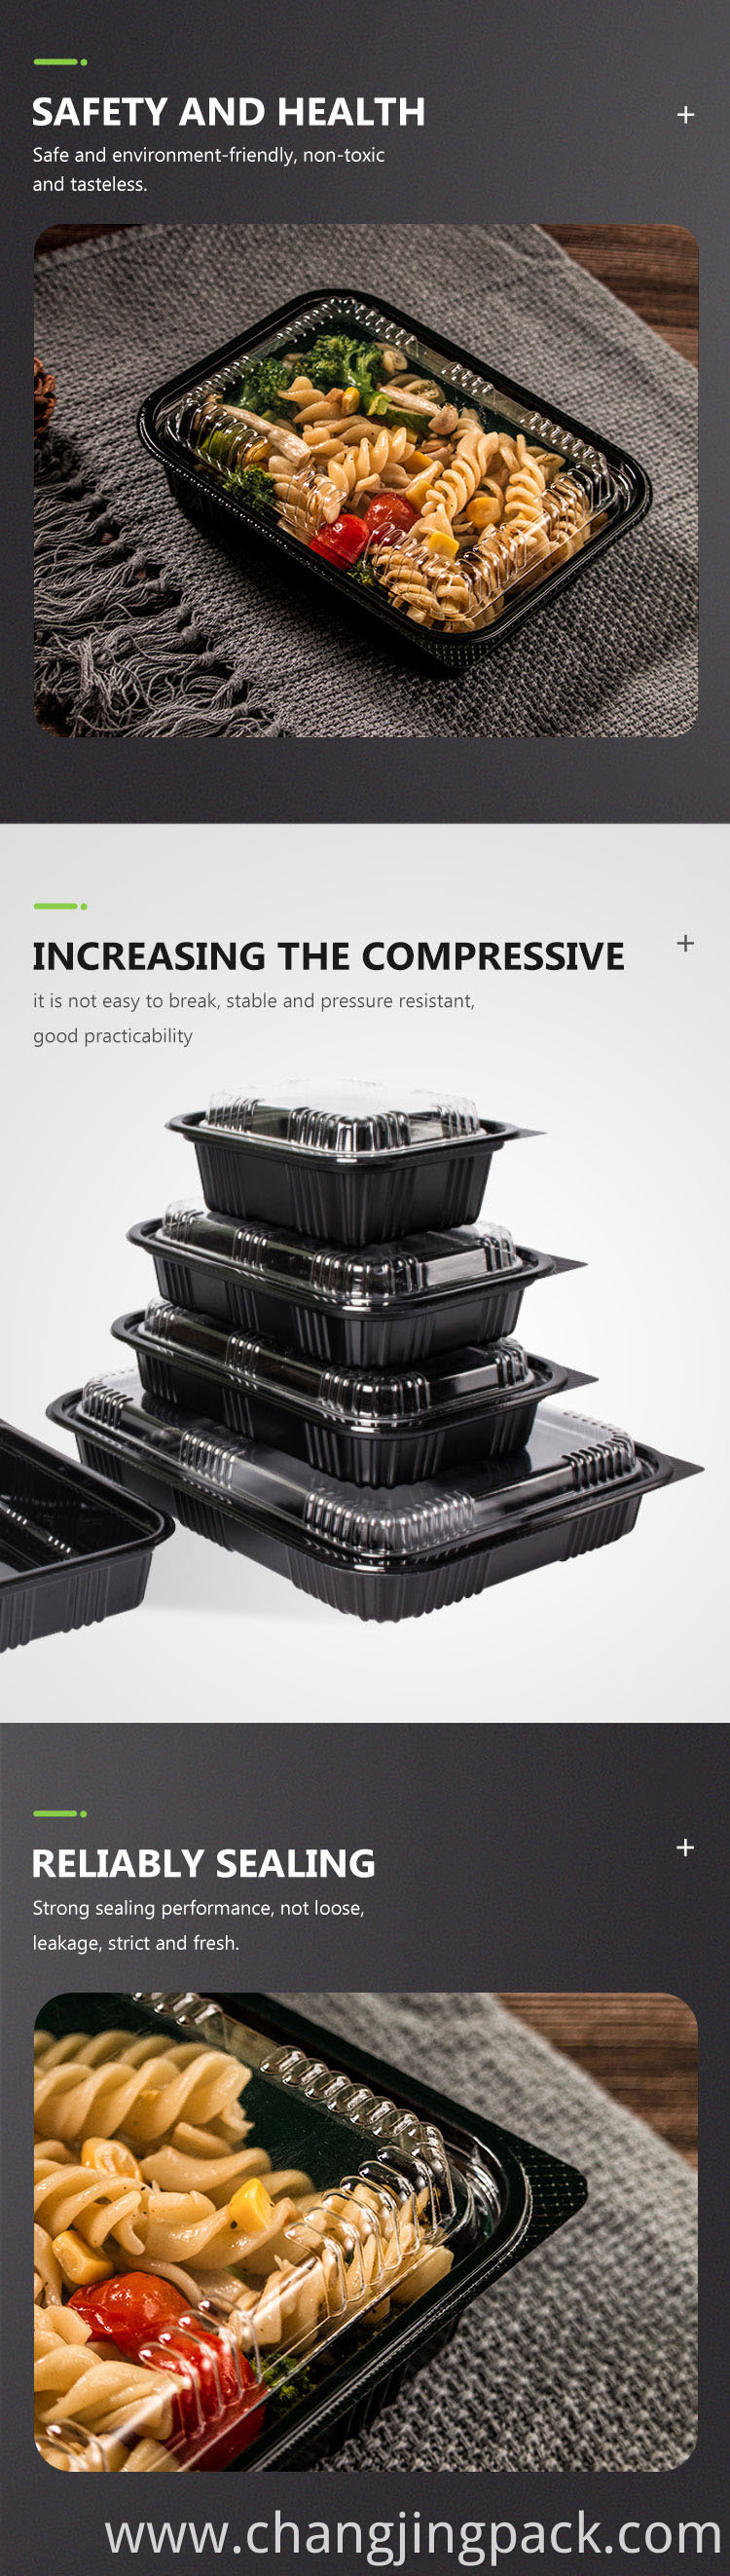  eco friendly food prep containers